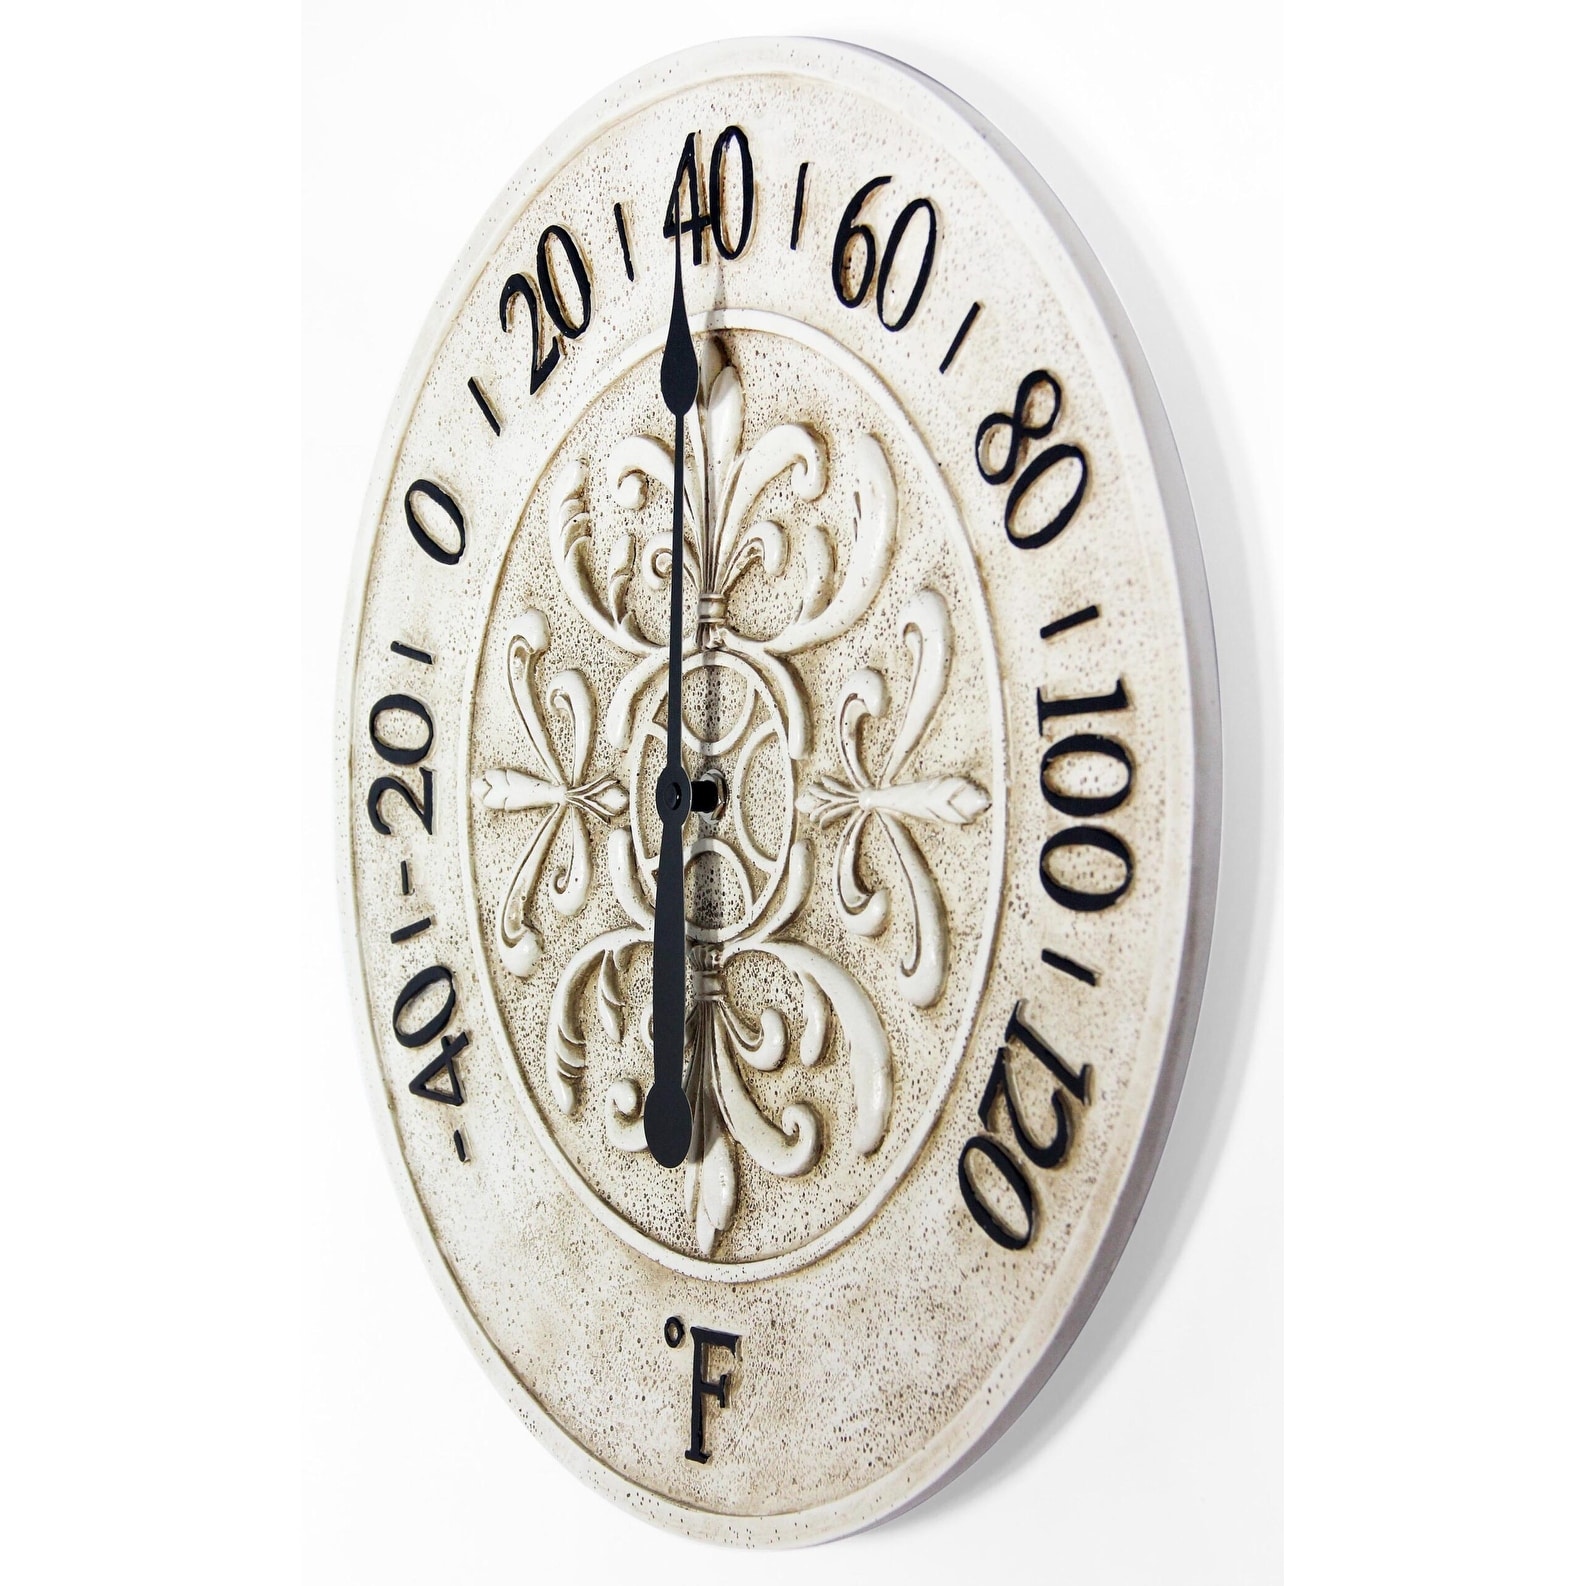 https://ak1.ostkcdn.com/images/products/is/images/direct/5b432ffc5176eef7ebfeb05b954c5330ff659a7c/Blanc-Fleur-Outdoor-Decorative-Round-15-inch-Wall-Thermometer-by-Infinity-Instruments.jpg